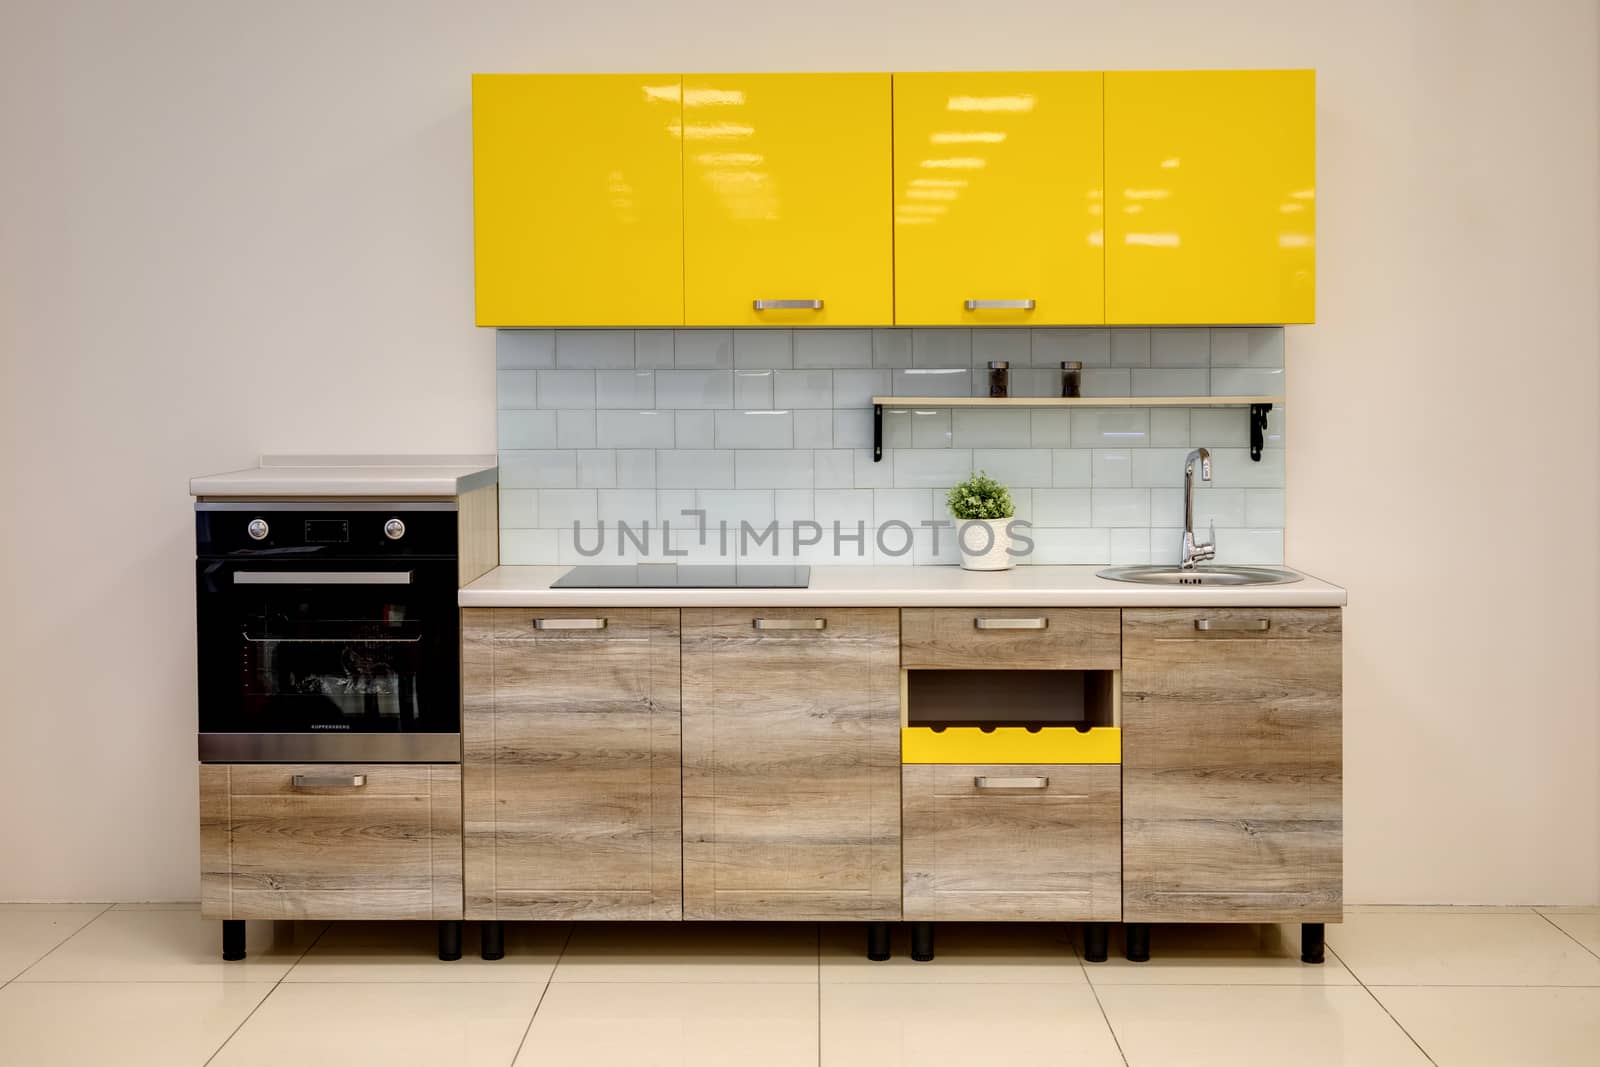 a kitchen interior with drawers by sveter